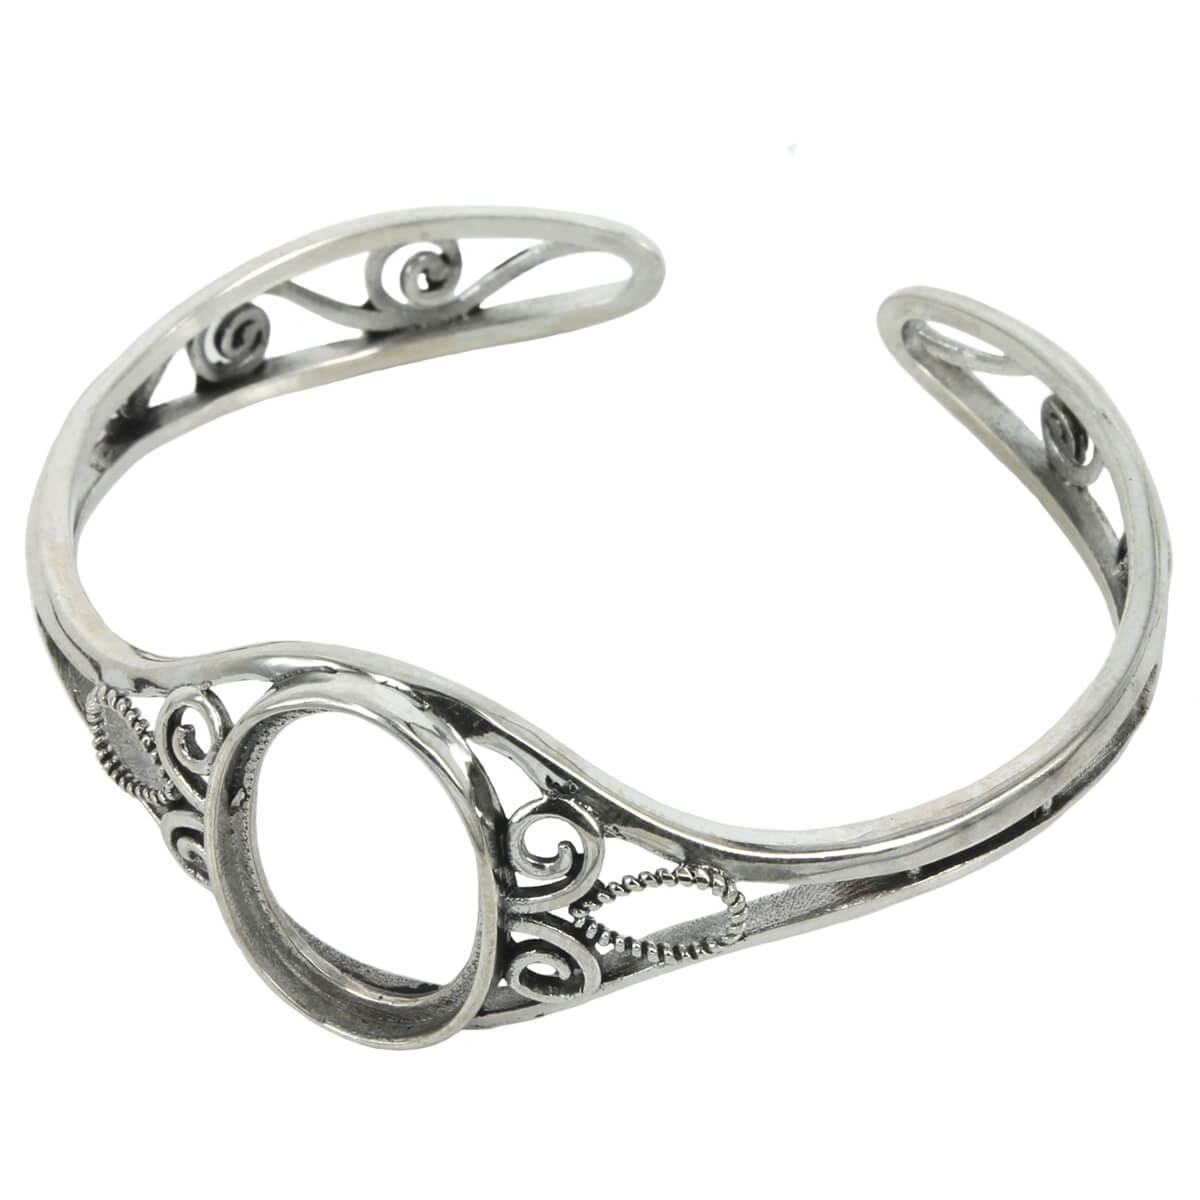 Curlicue Filigree Cuff Bracelet with 13x18mm Oval Bezel Mounting in Sterling Silver 